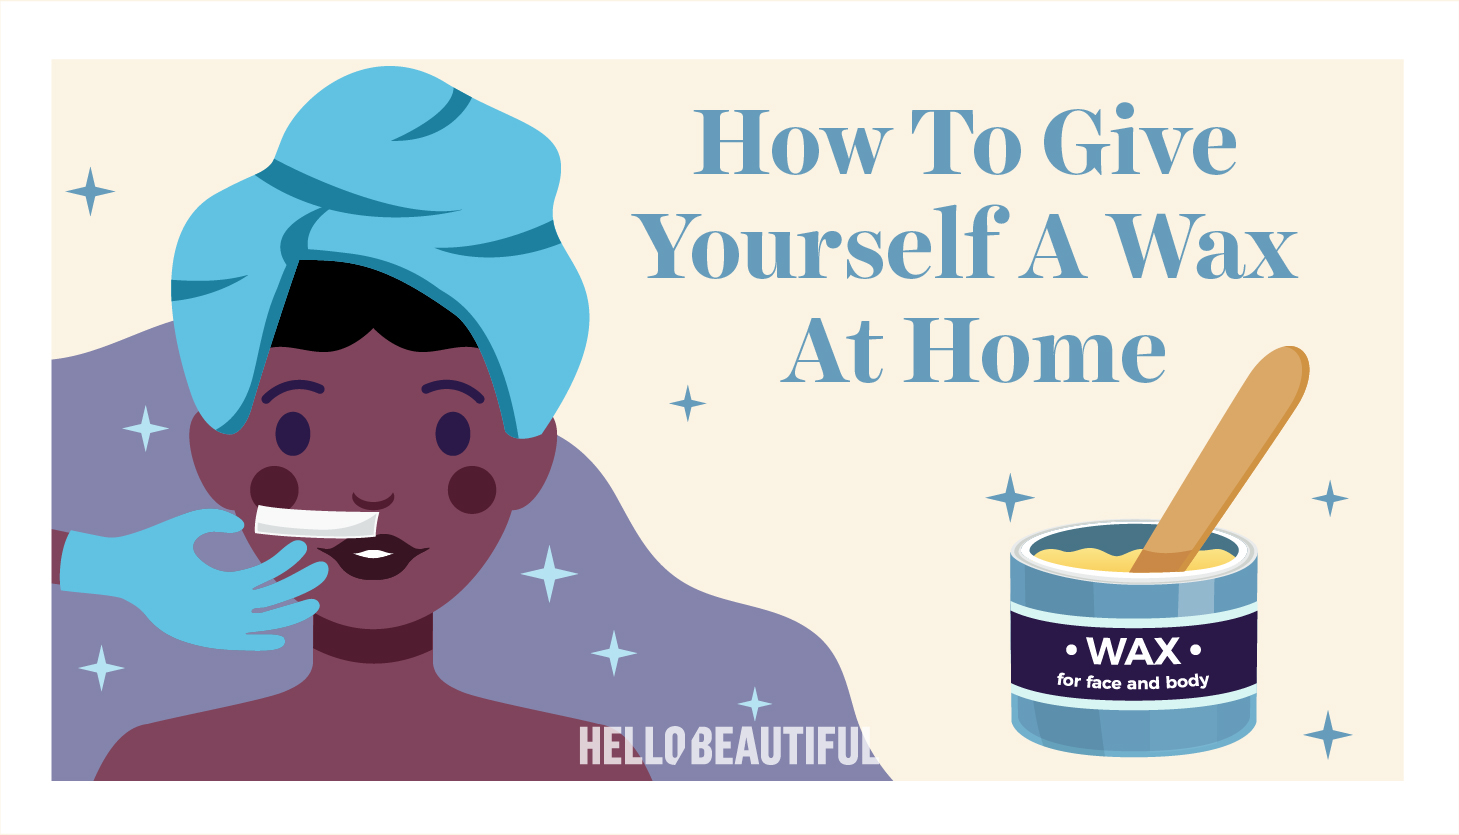 How To Give Yourself A Wax At Home